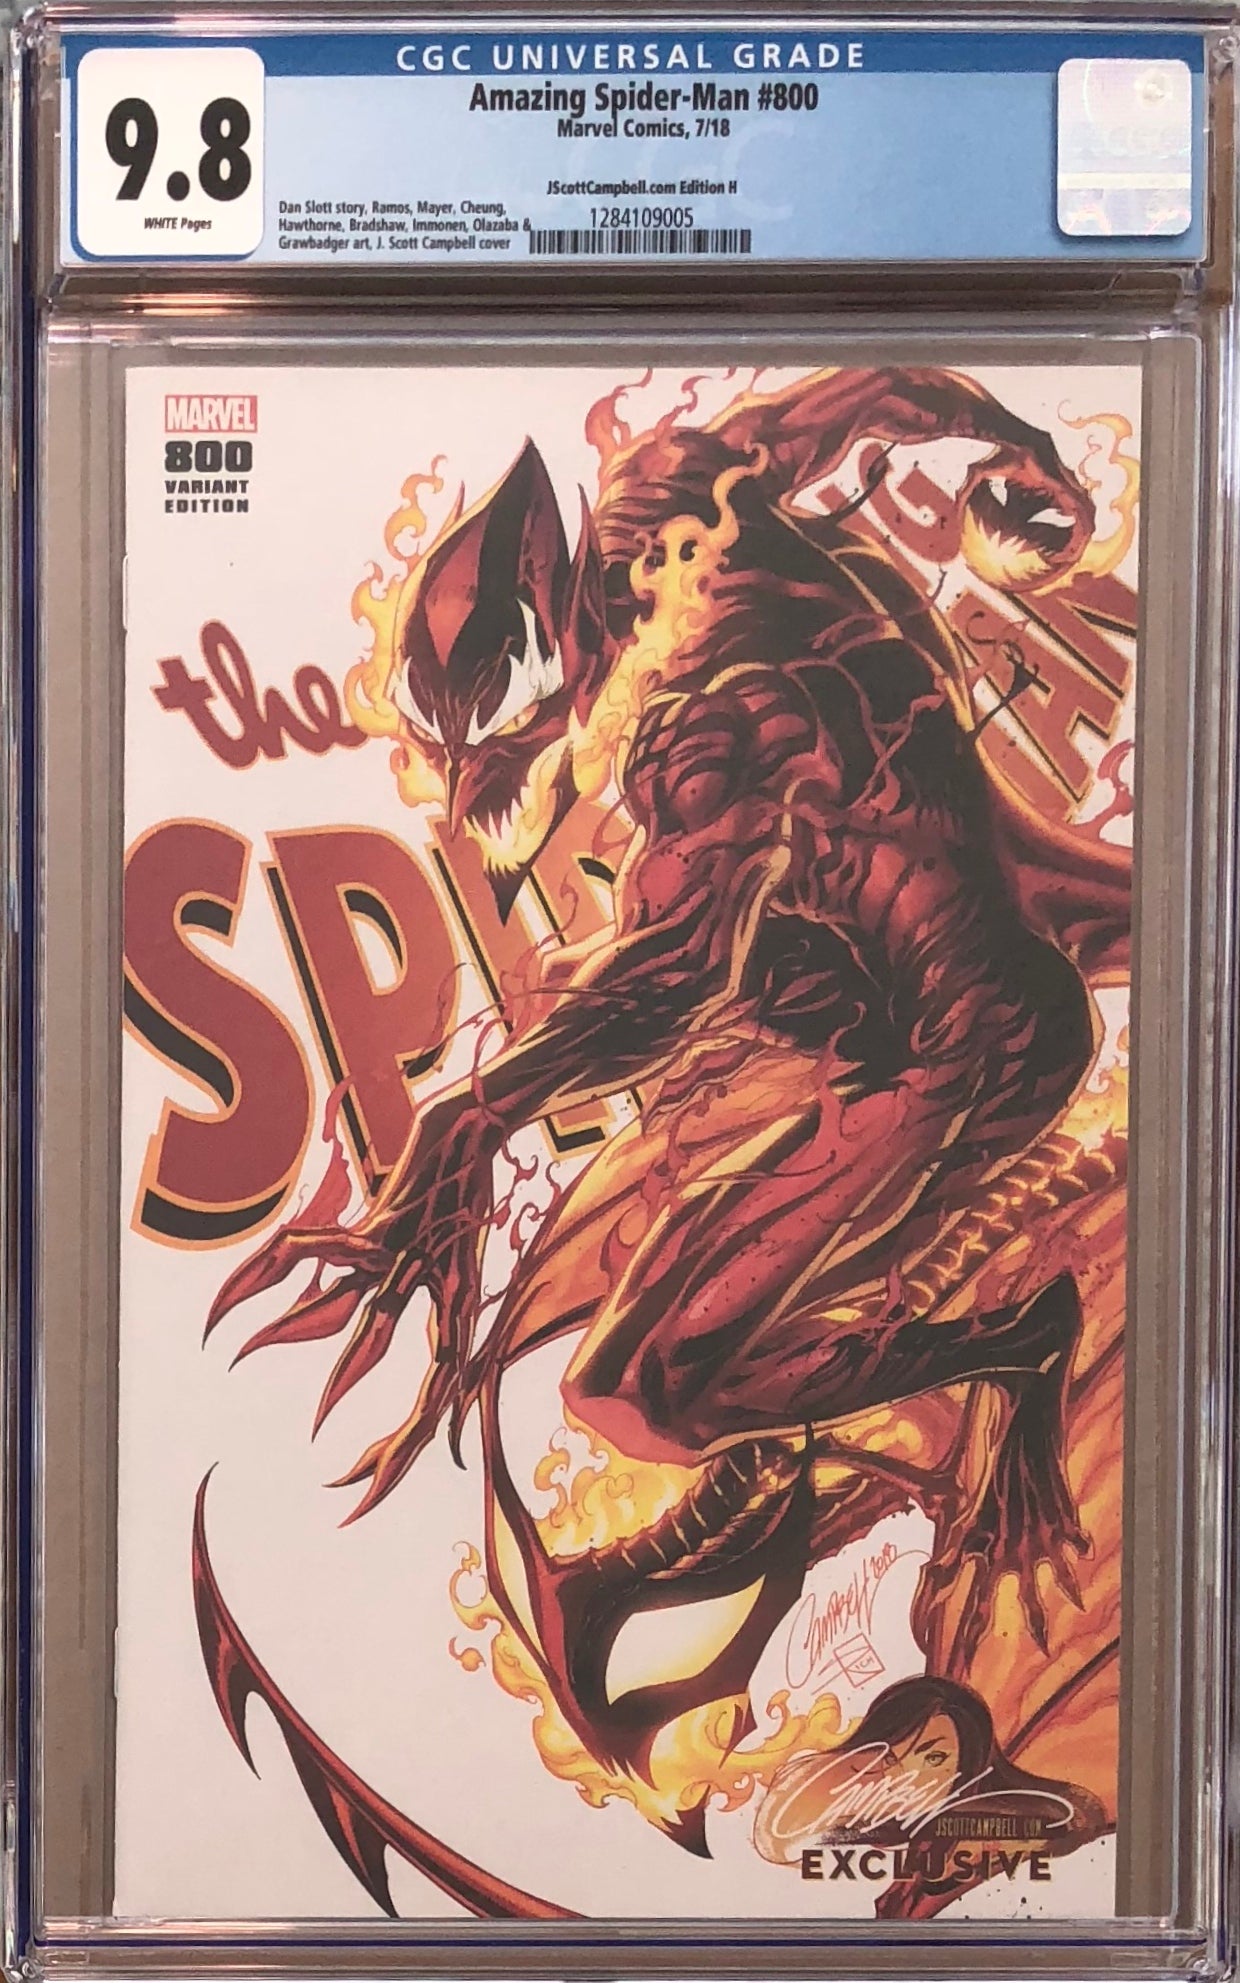 Amazing Spider-Man #800 J. Scott Campbell Edition H "Red Goblin" Exclusive CGC 9.8